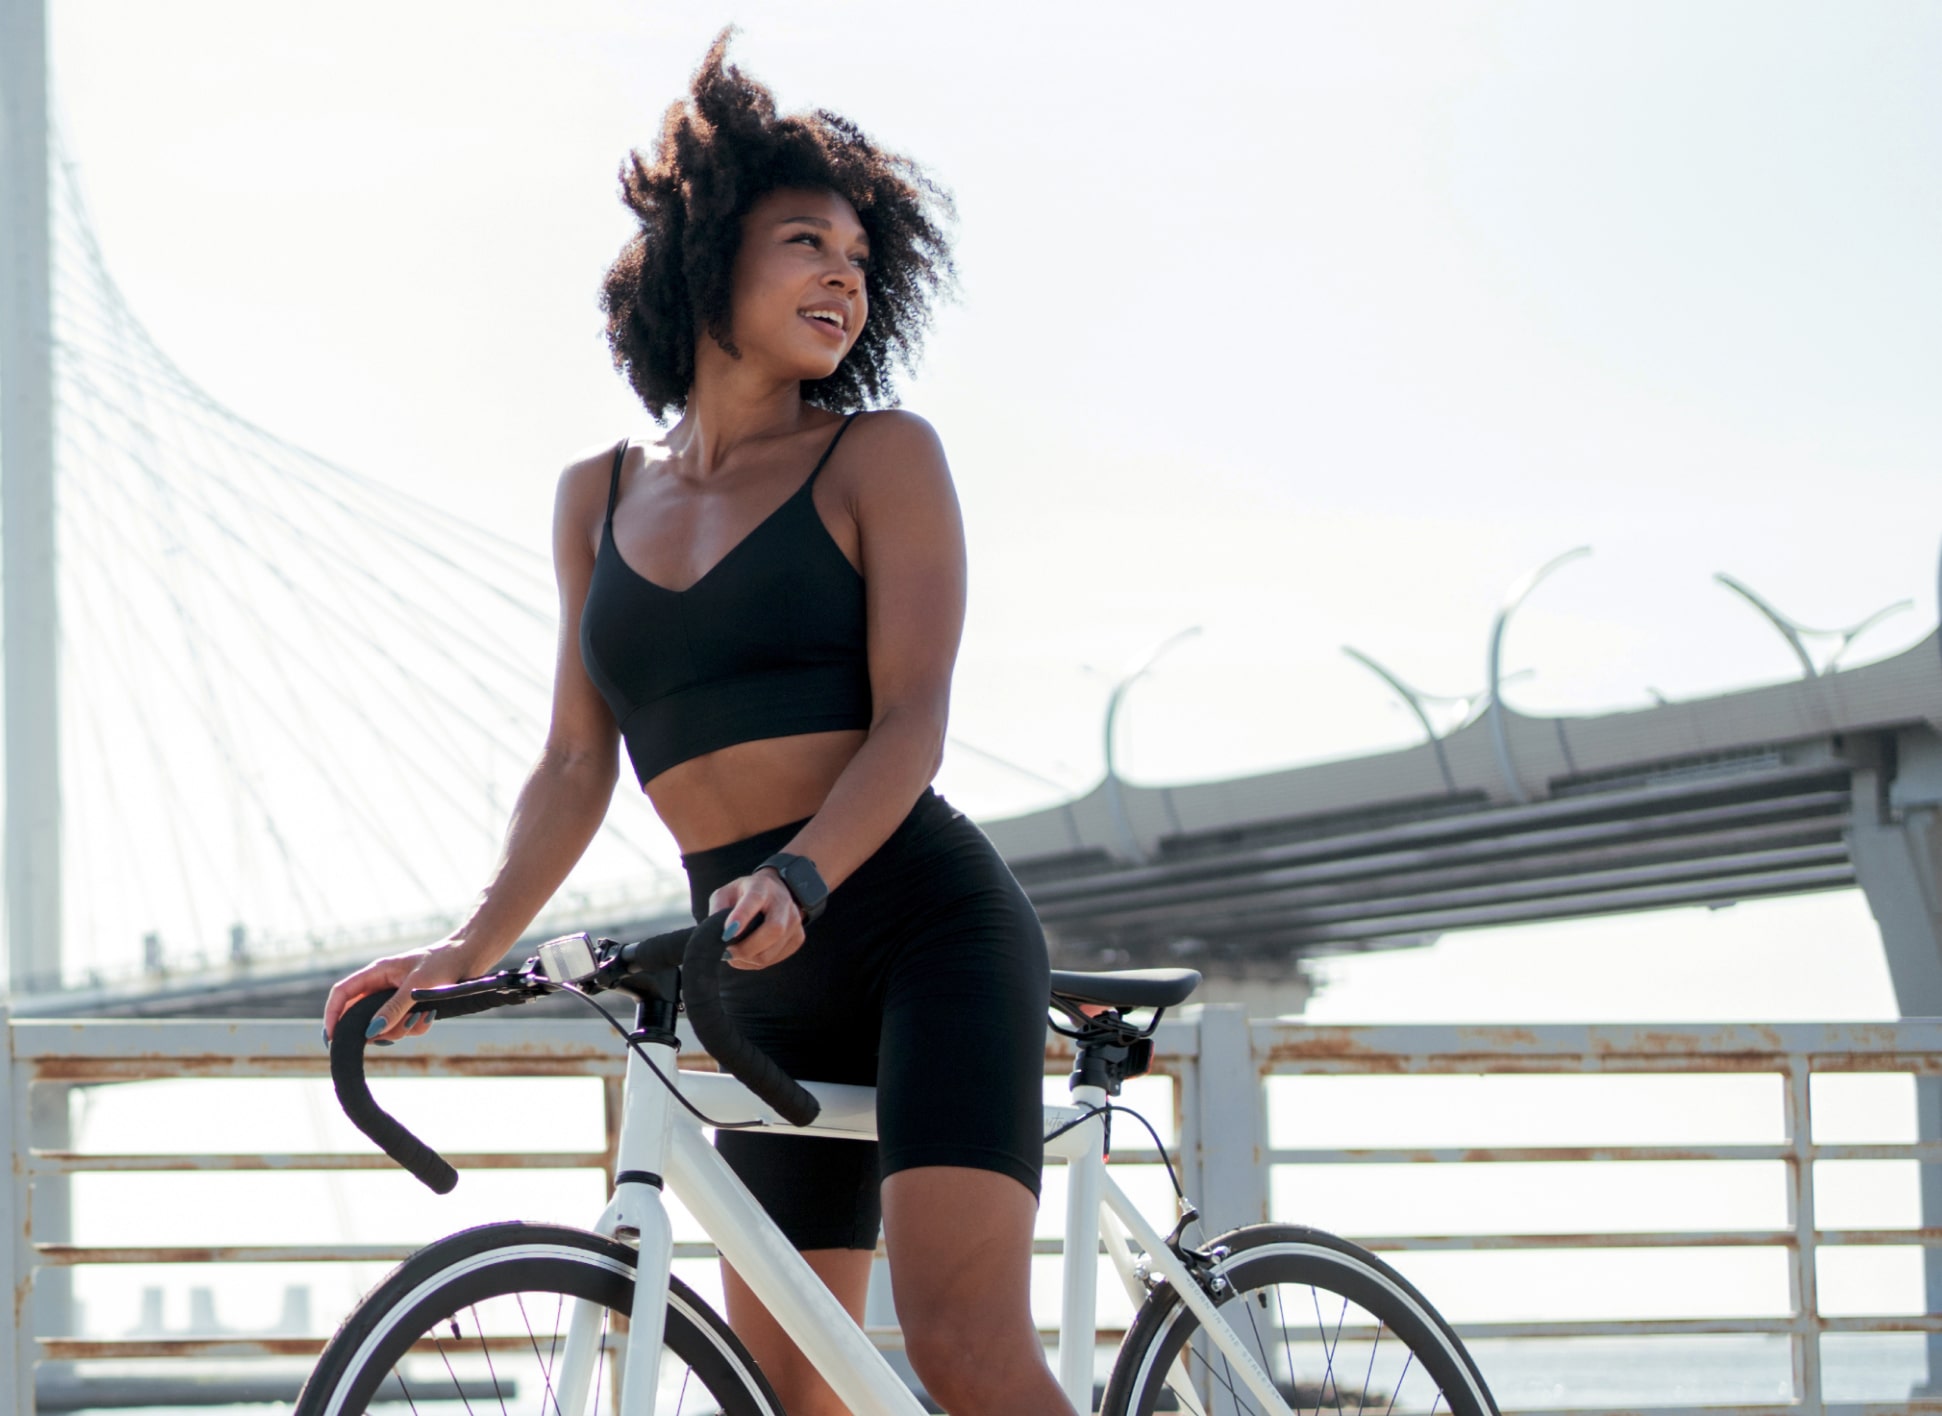 woman exercising on her bike and enjoying the day